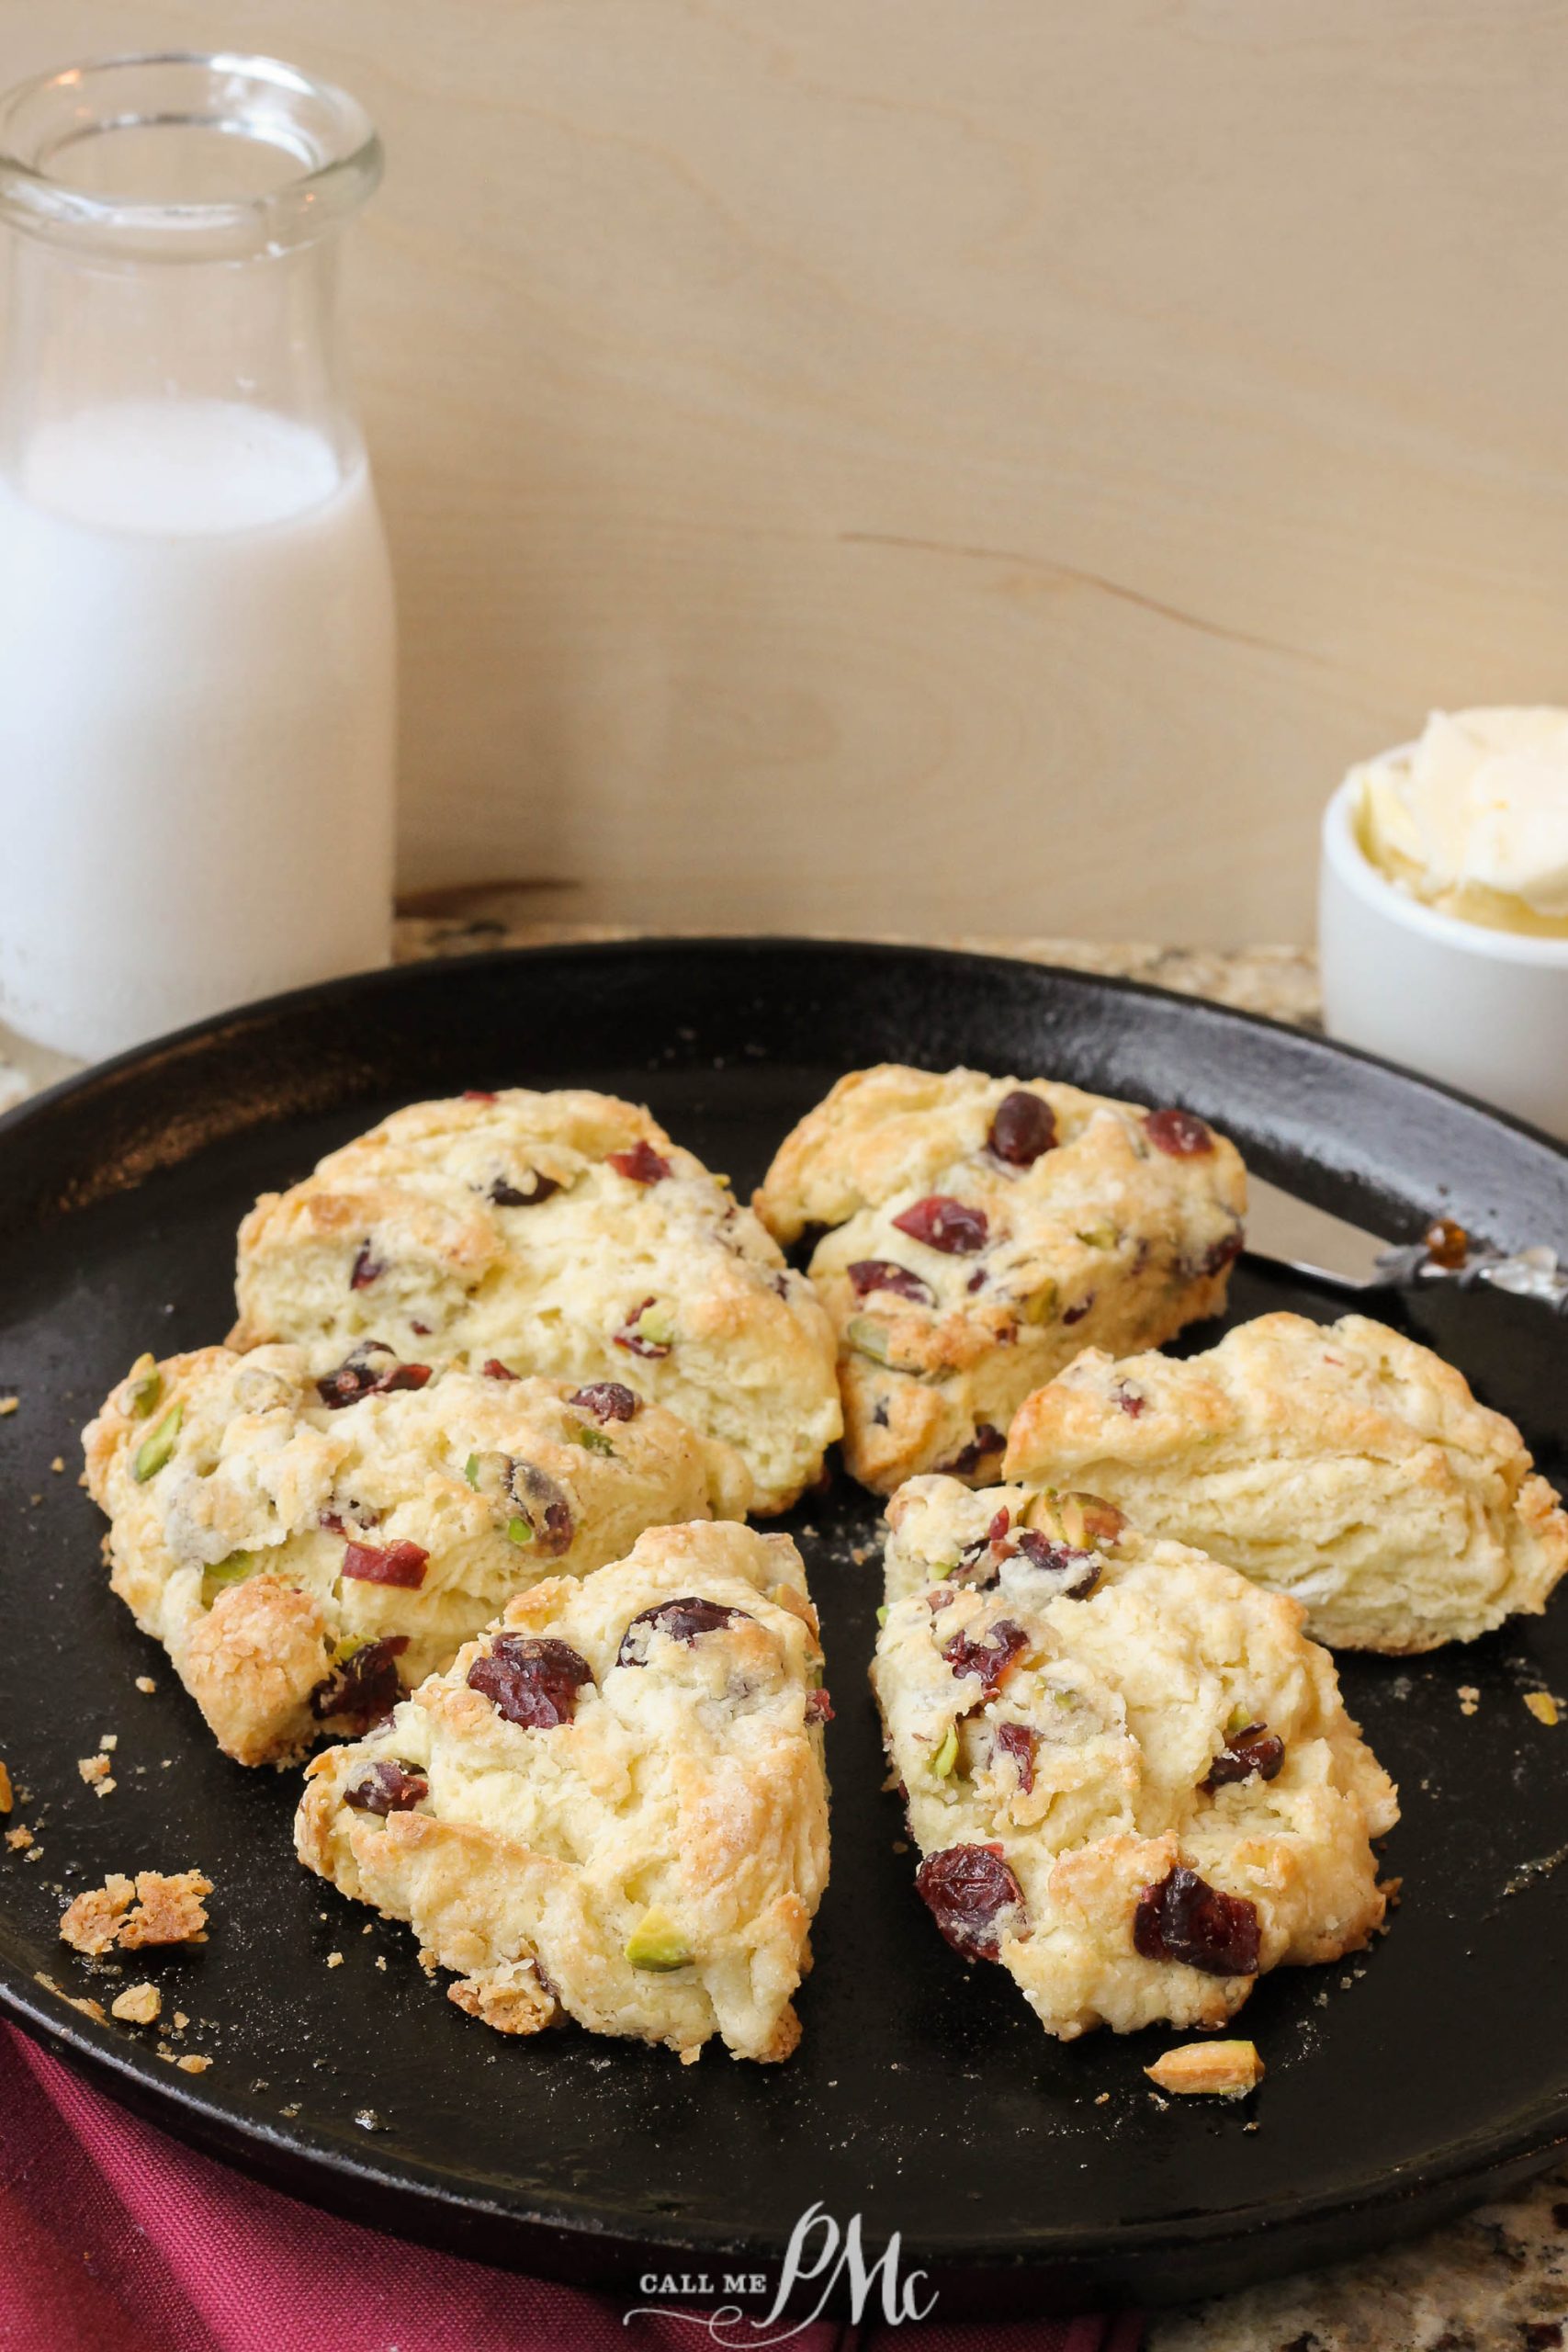 Freshly baked scones with cranberries and nuts on a black plate, with a glass milk bottle and butter in the background.